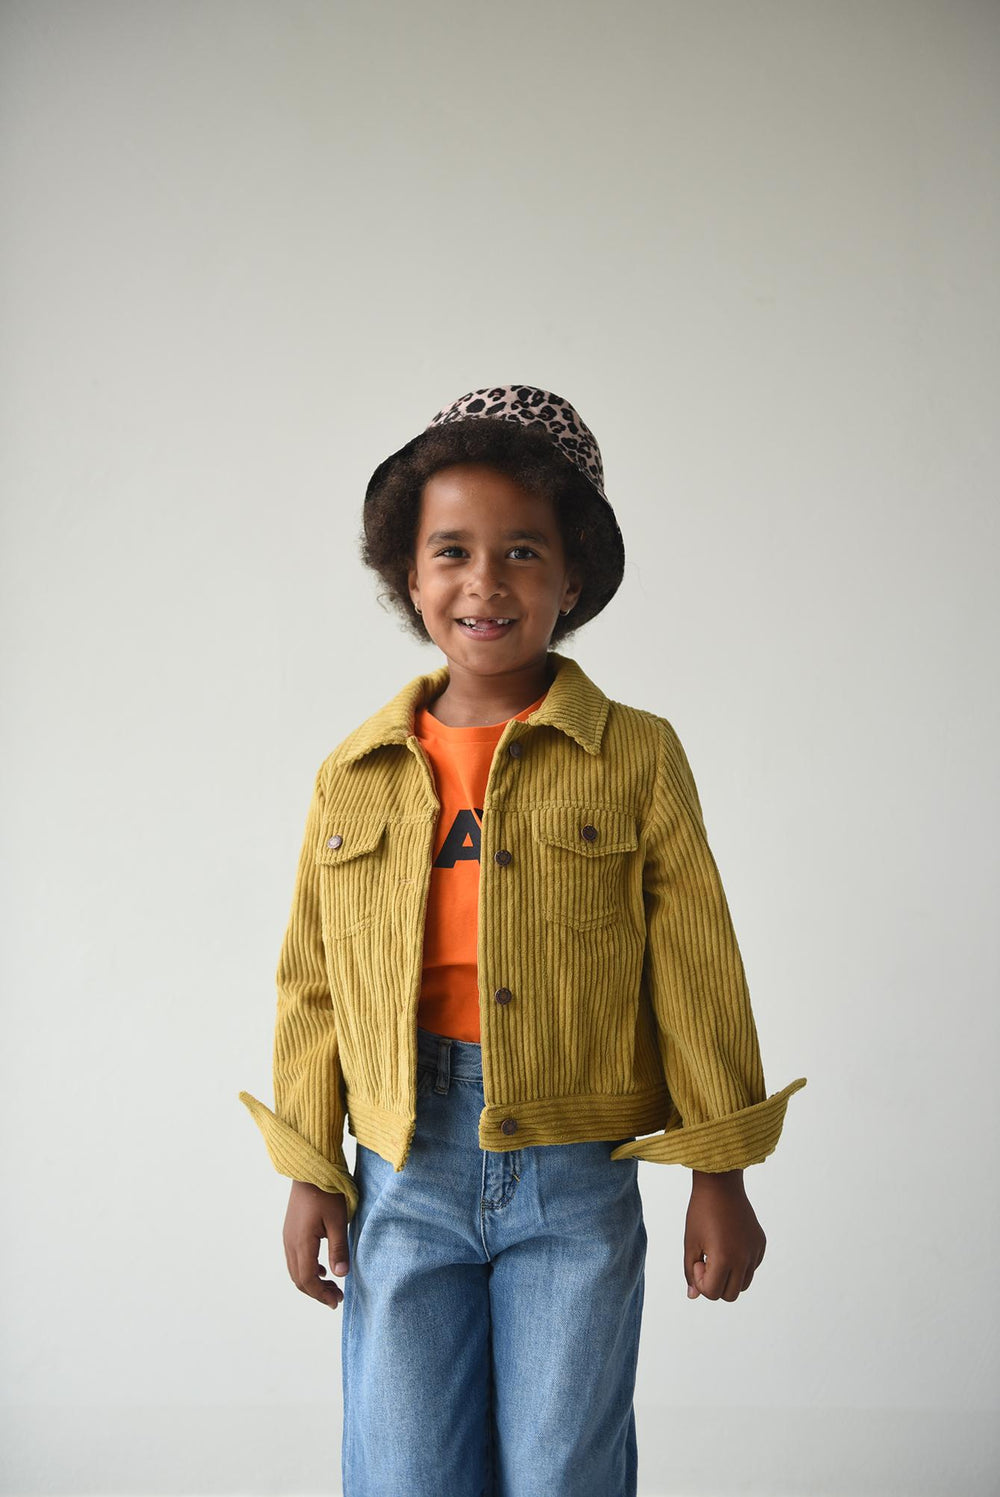 Child wearing the Child/Teen Legend Jacket sewing pattern from Fibre Mood on The Fold Line. A jacket pattern made in corduroy, cotton or denim fabrics, featuring a cropped length, two chest pockets, collar, snaps/jeans buttons fastening and full length sl